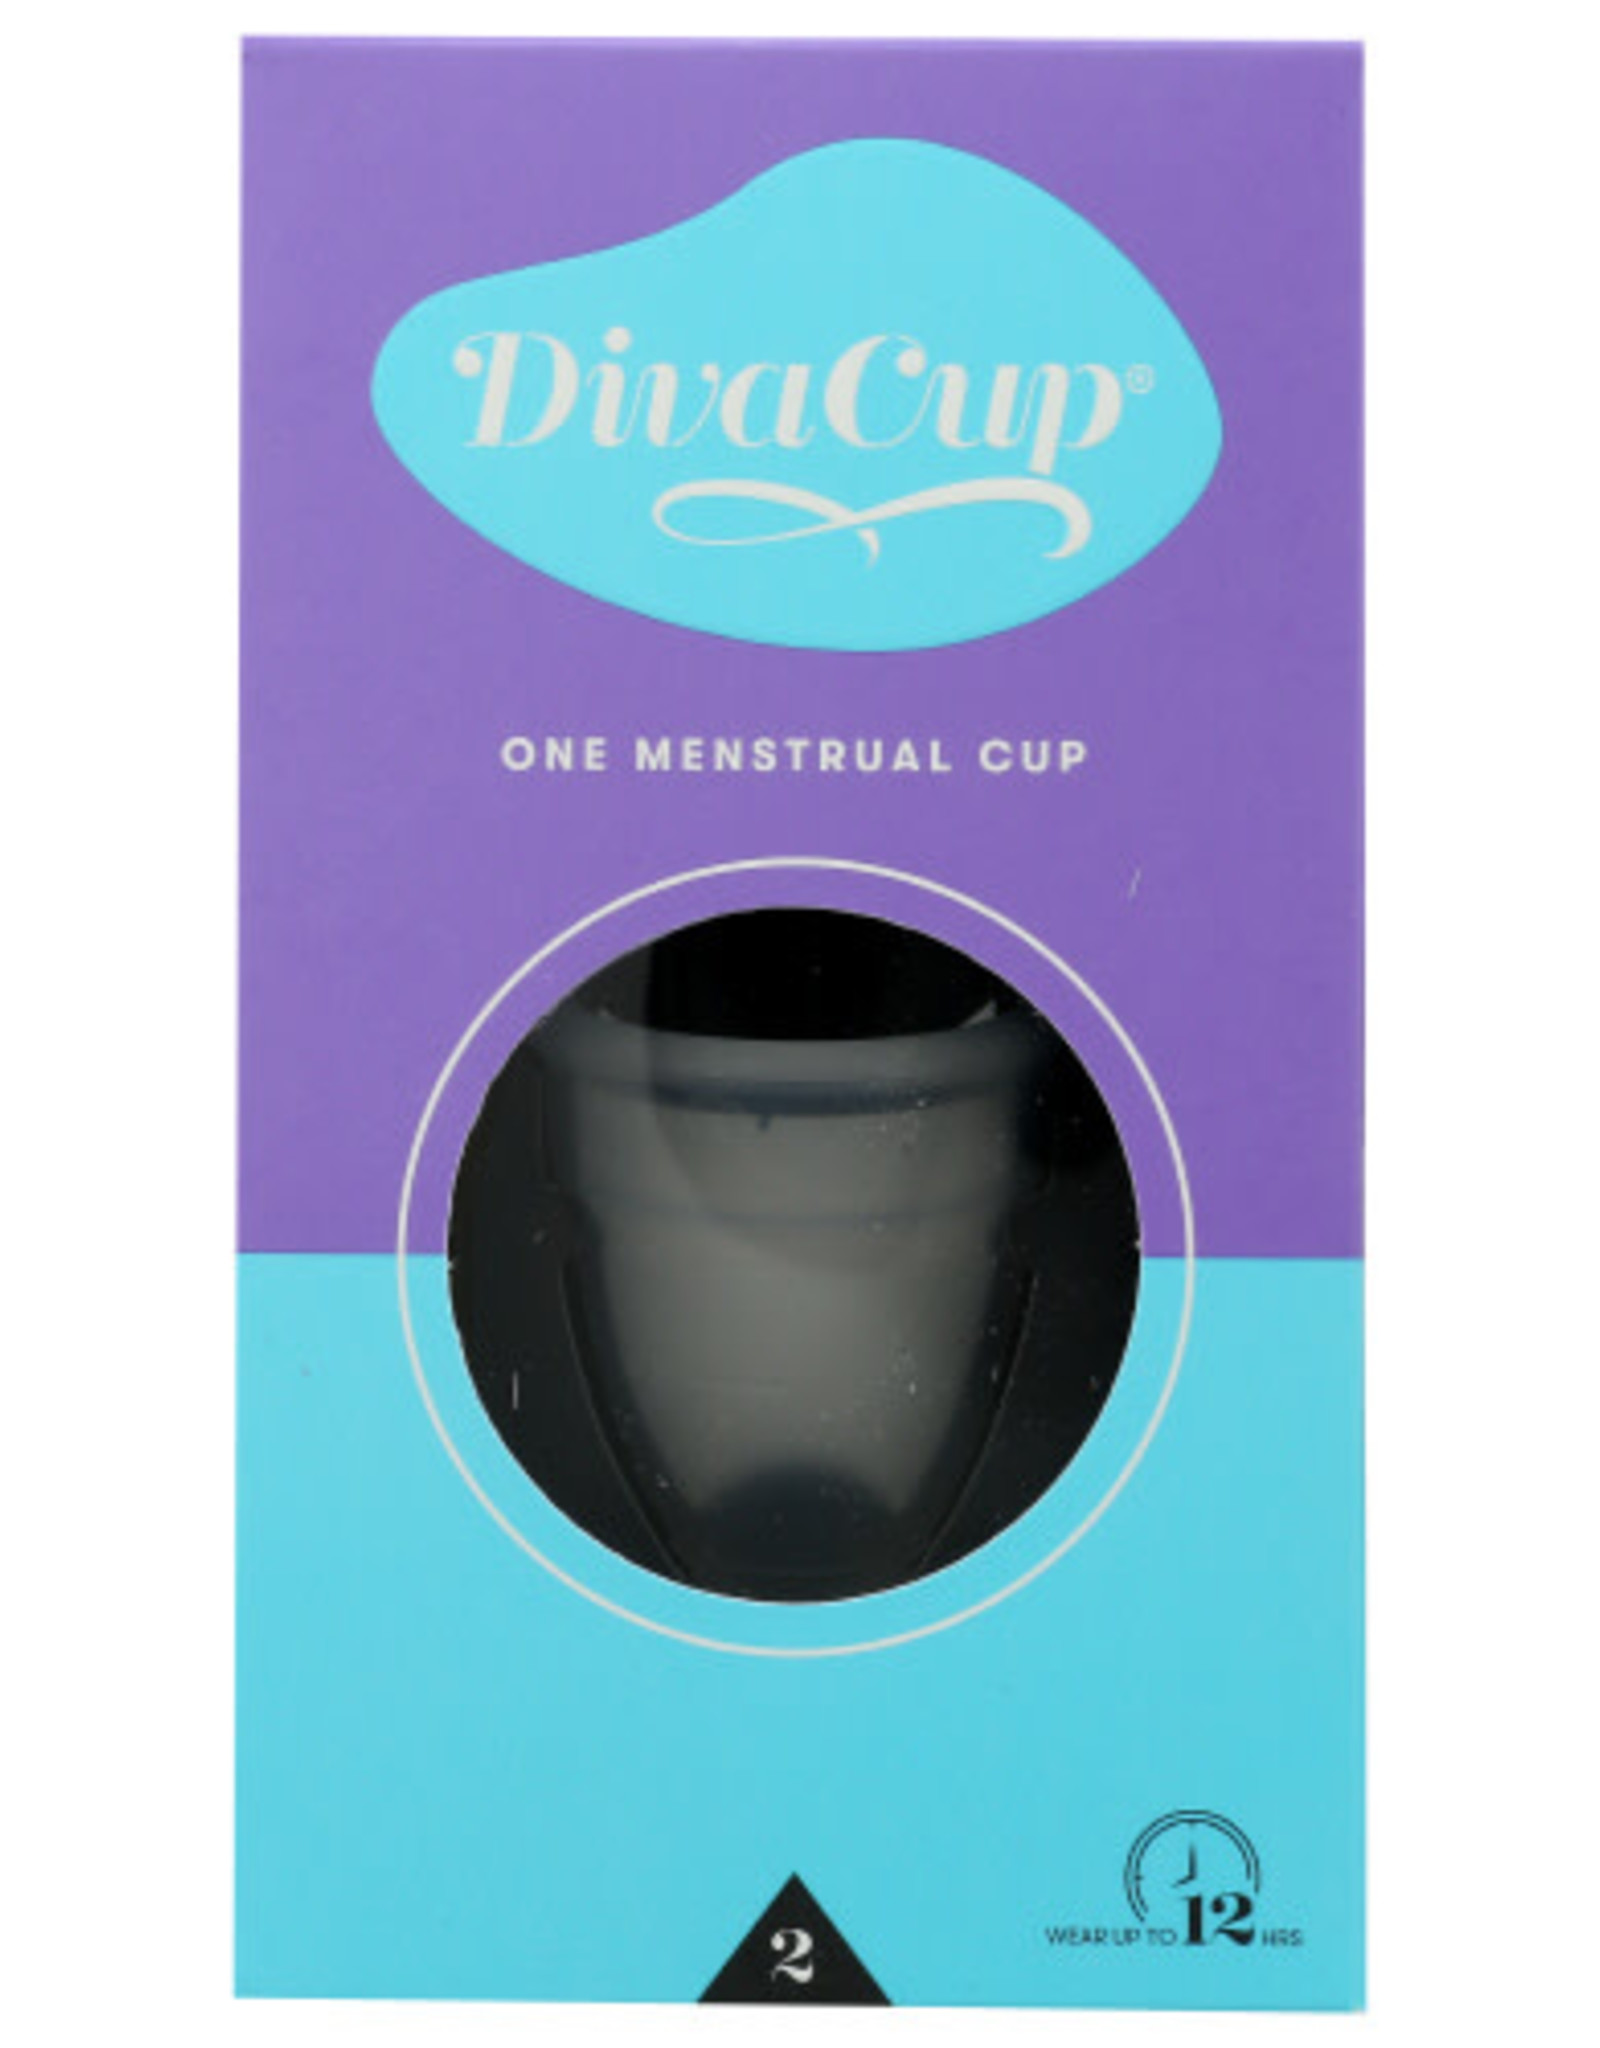 THE DIVA CUP® THE DIVACUP MODEL 2, FEMININE HYGIENE MENSTRUAL CUP, 1 COUNT